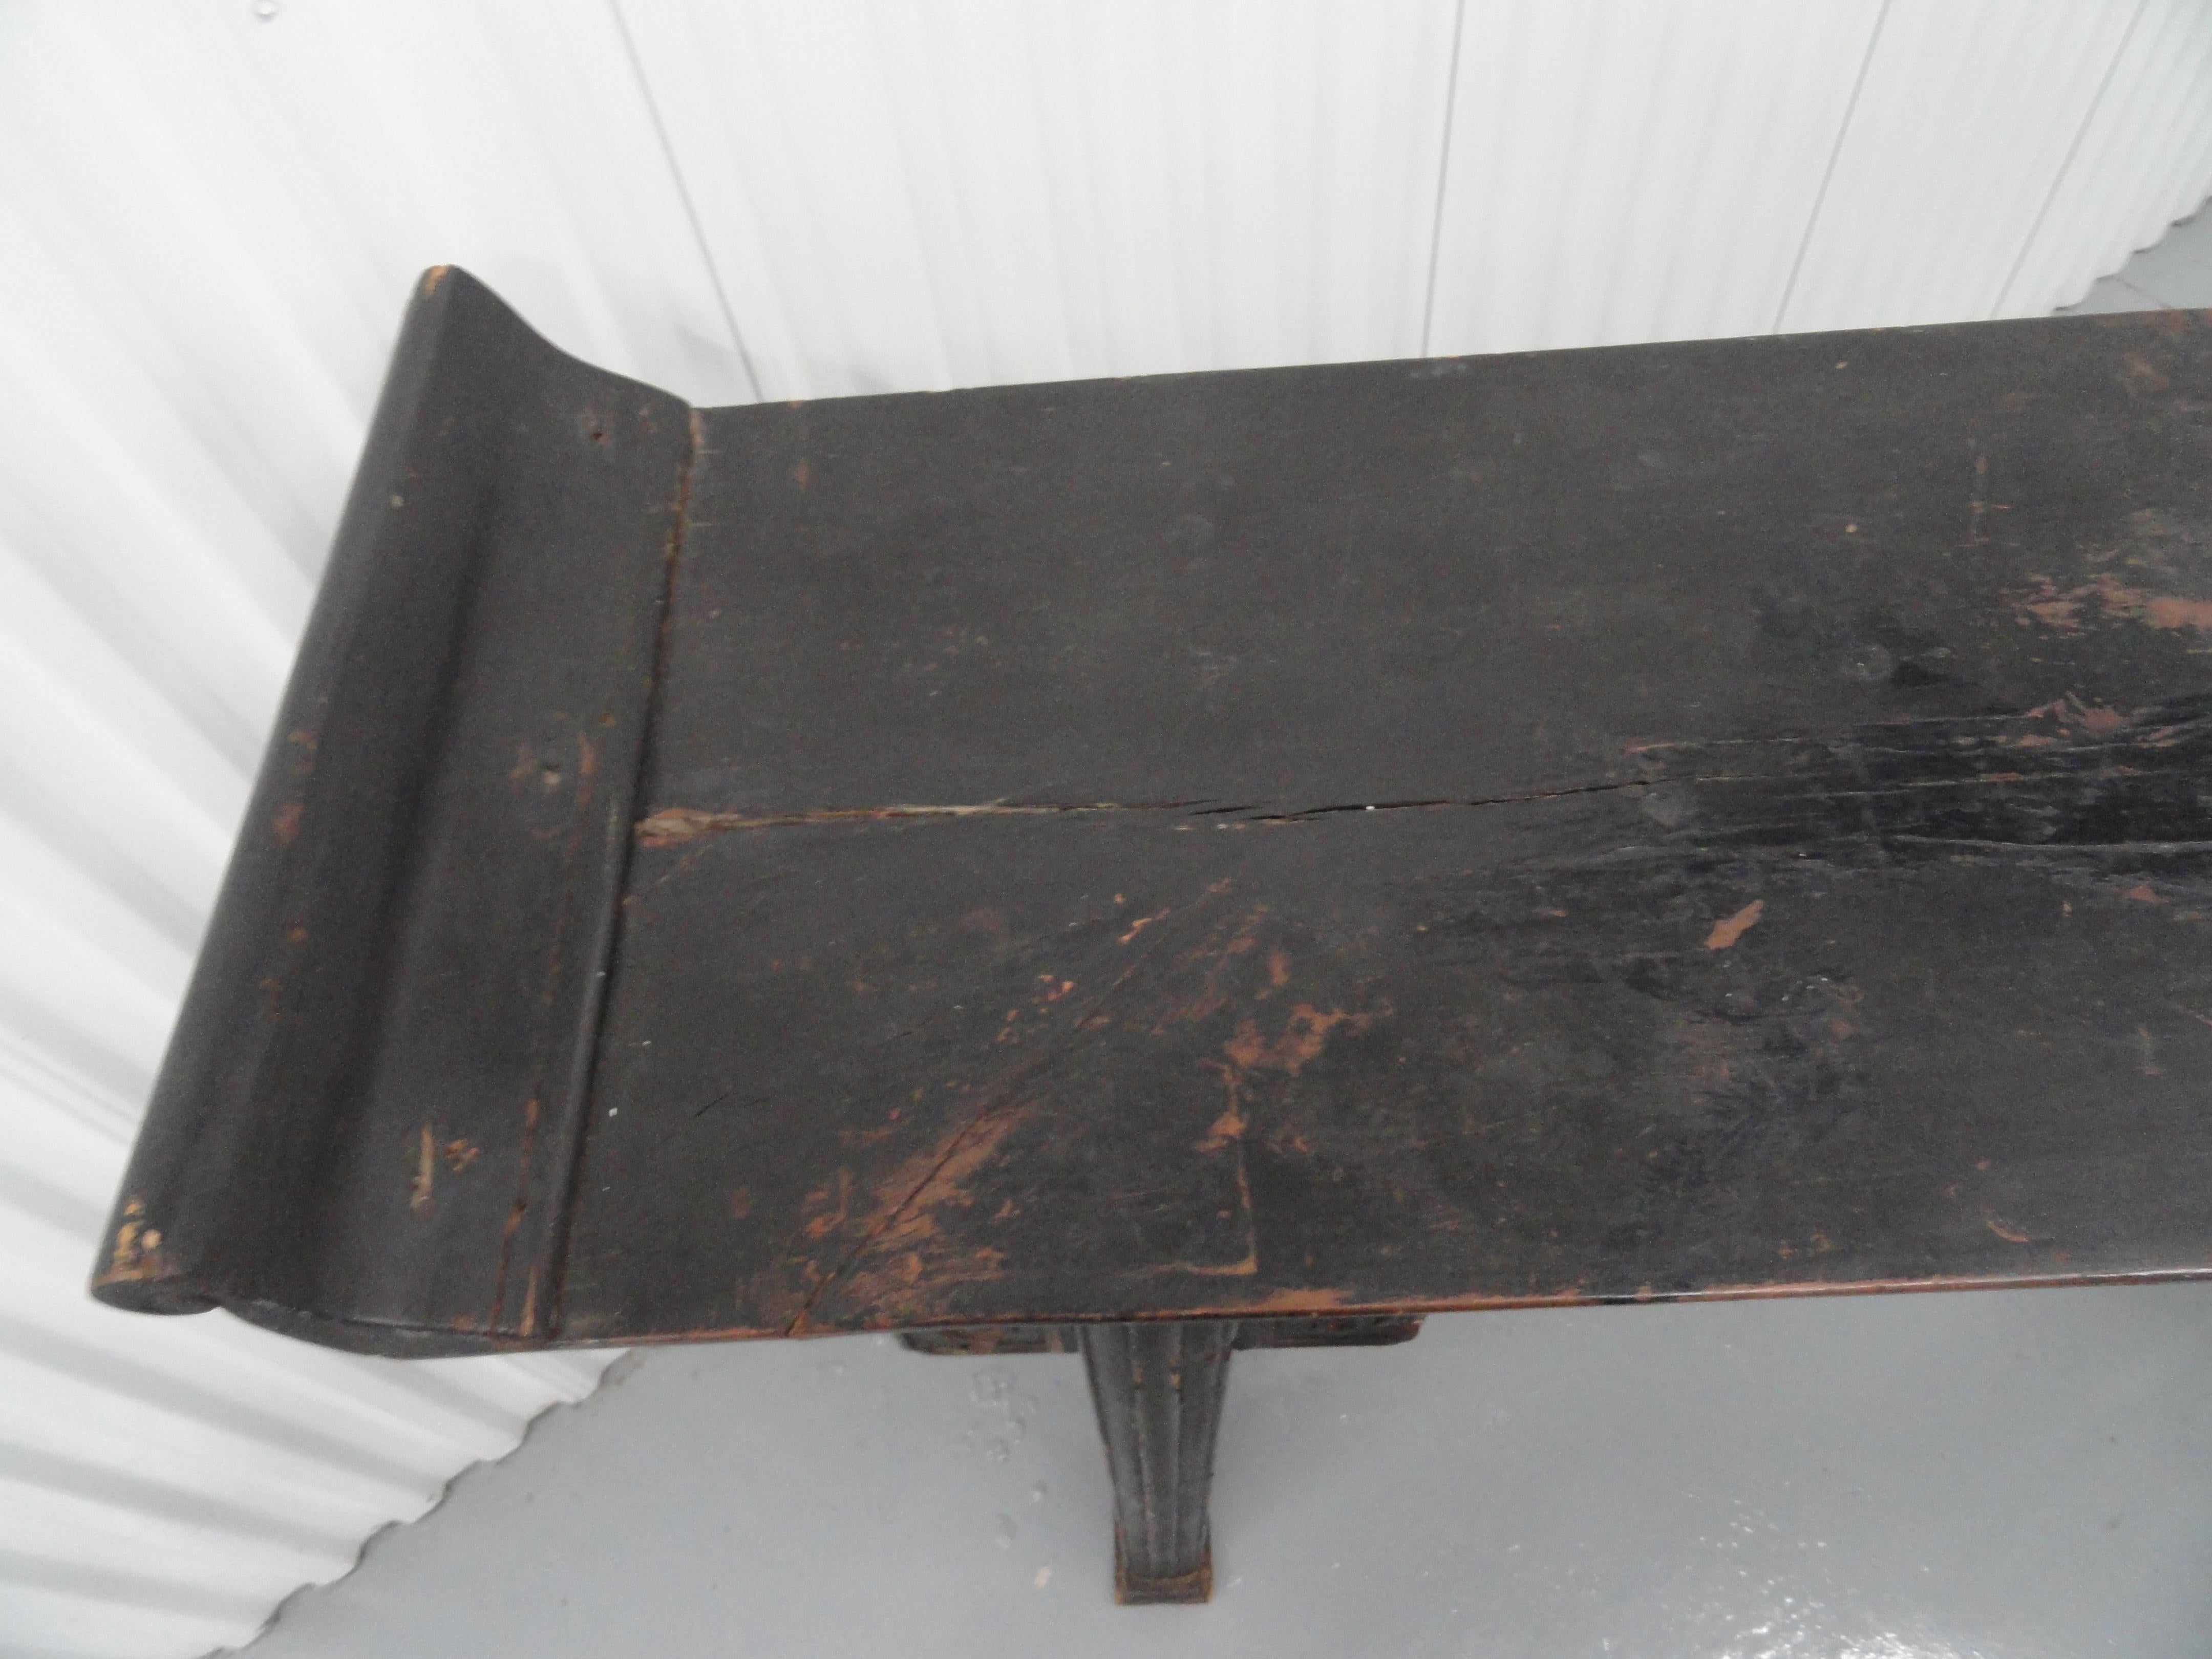 19th Century Chinese Altar Table For Sale 2